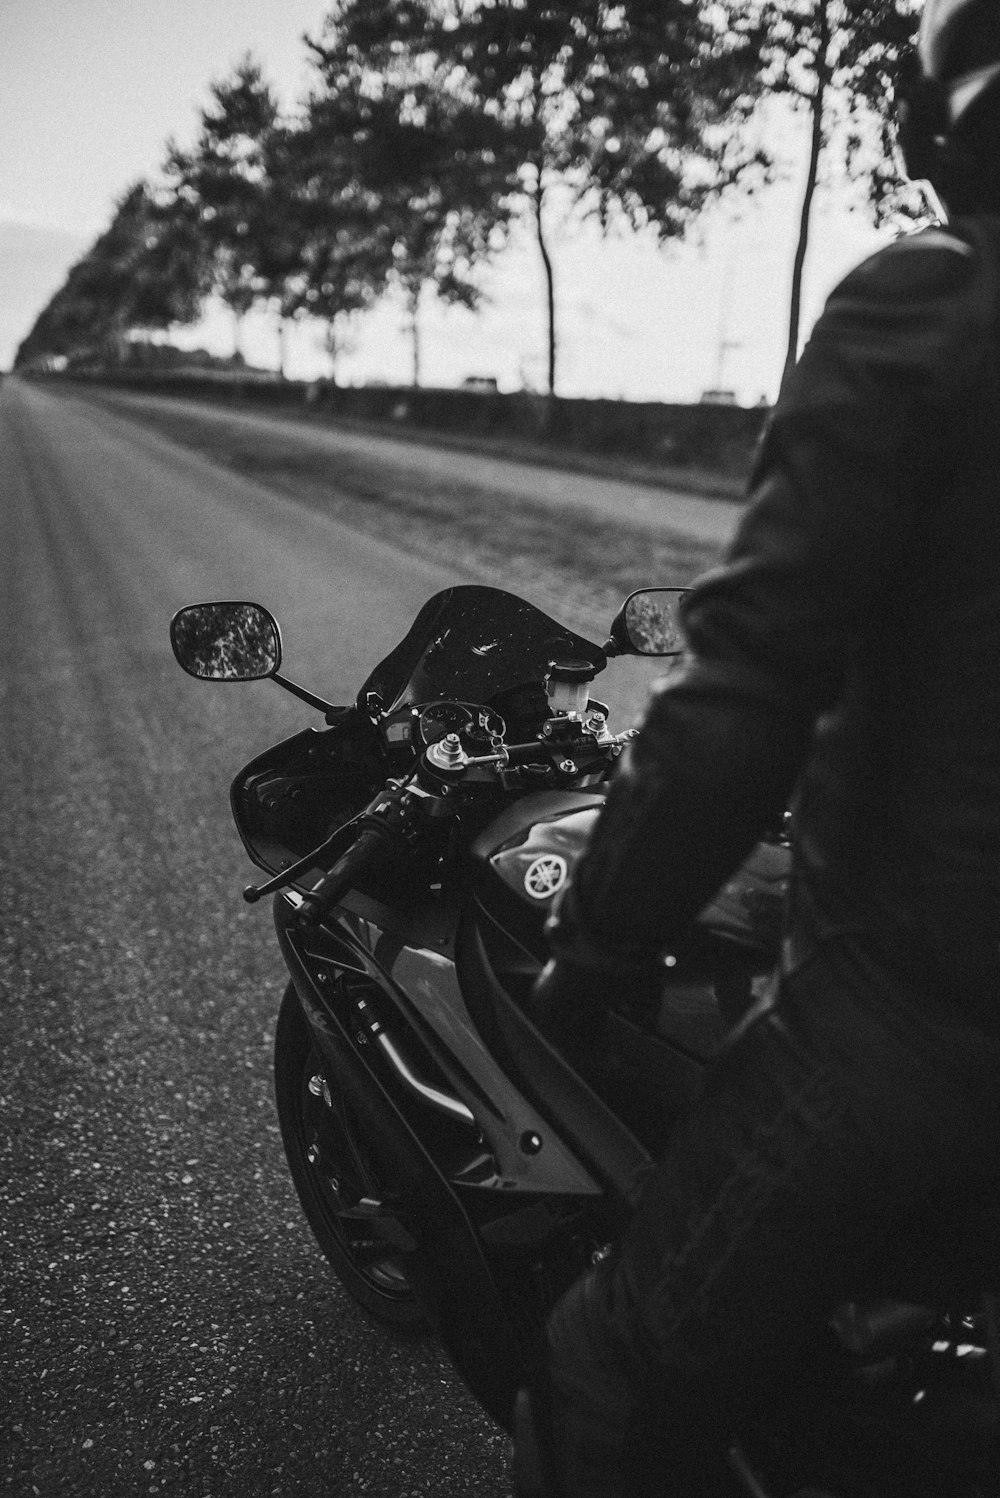 grayscale photo of man riding on motorcycle